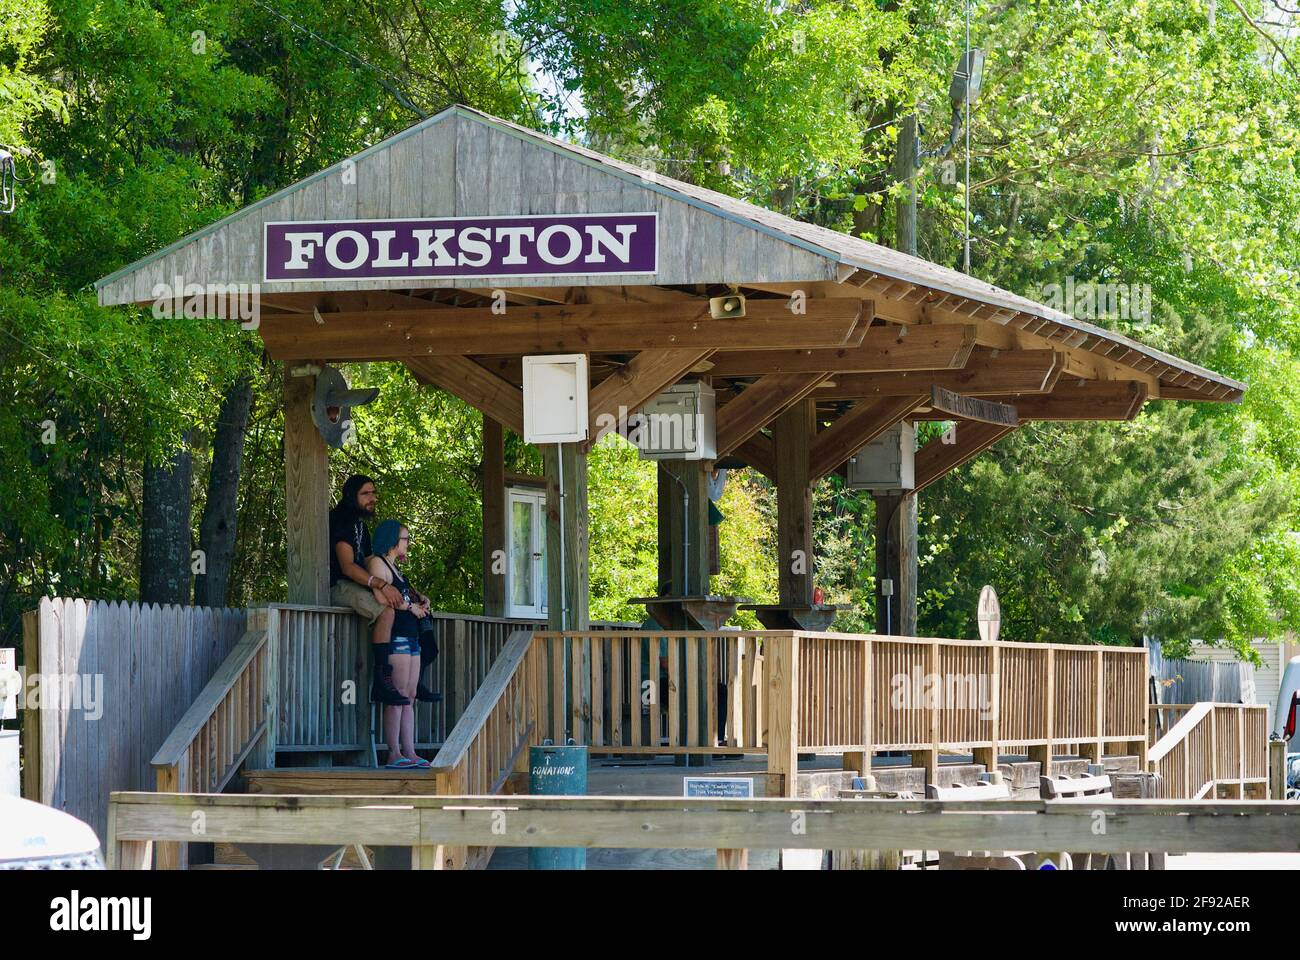 Folkston, George, USA - April 5, 2021: A couple await trains to pass through the 'Folkston Funnel' at the 'Folkston Funnel Platform' for rail fans. Stock Photo